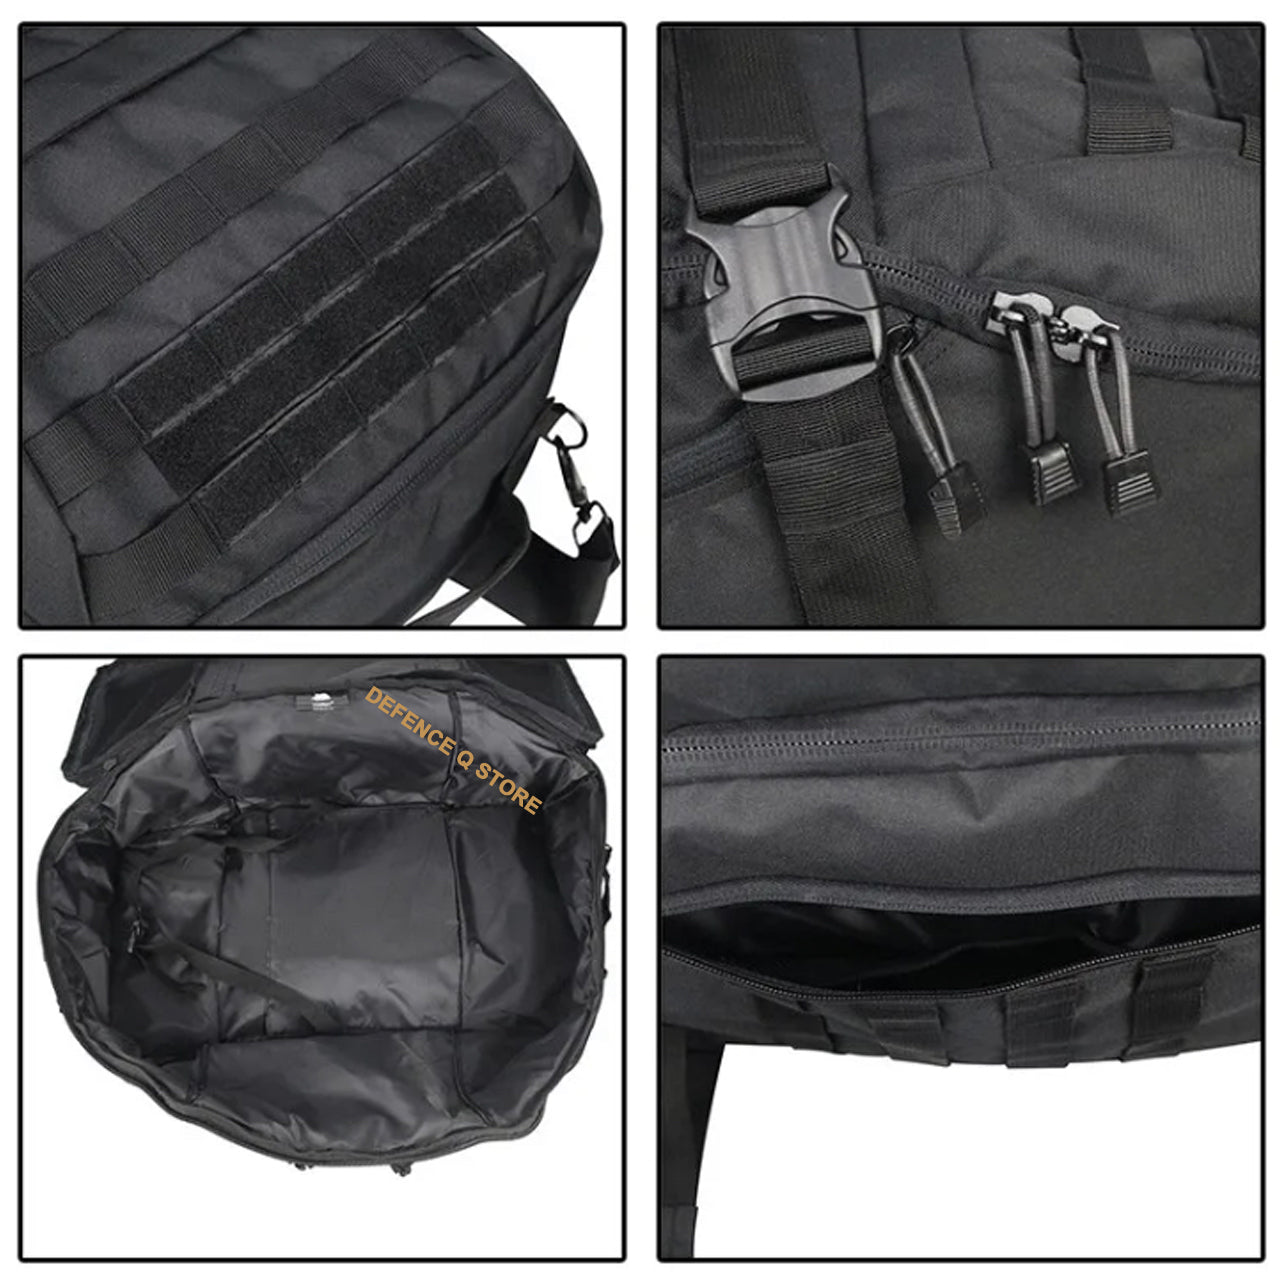 Discover the endless possibilities of this 80LT backpack, perfect for all your camping, hiking, and travel needs. Go on your next adventure with everything you need at your fingertips! www.defenceqstore.com.au